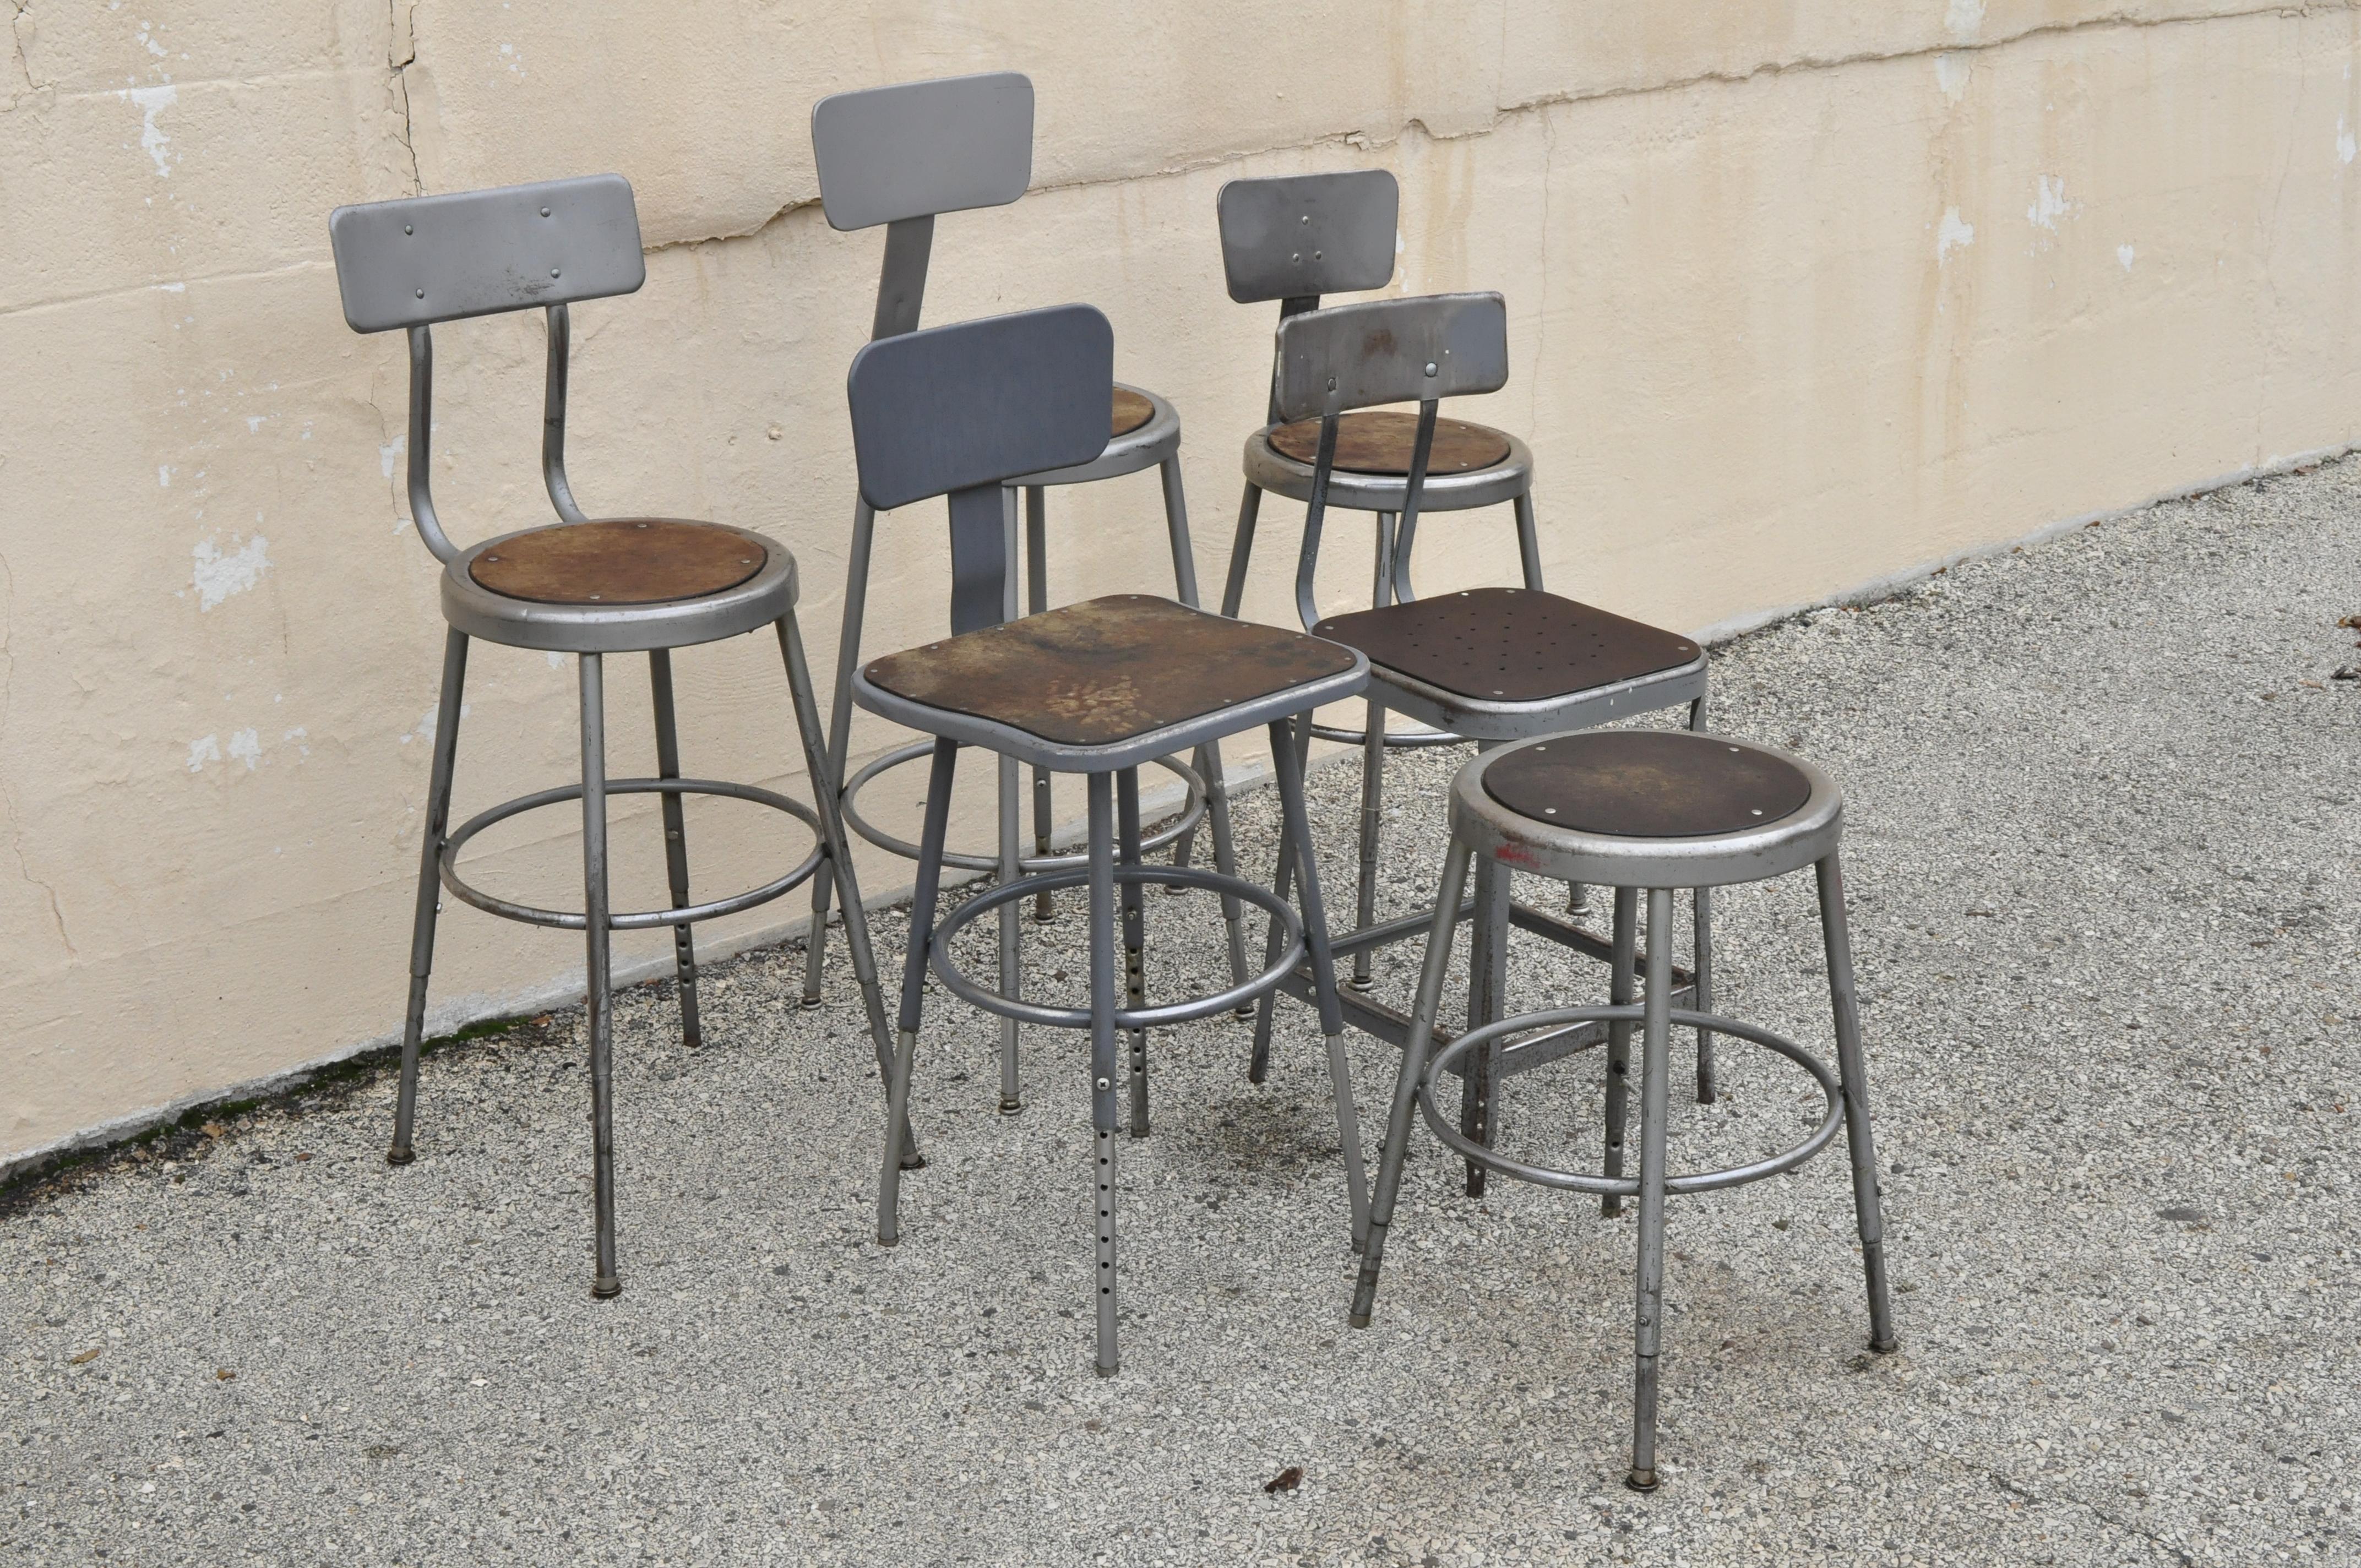 Group lot of six vintage industrial steel metal drafting work stools chairs. Listing includes a group of 6 various industrial steel metal work stools, some with adjustable backrests and height, masonile seats, very nice vintage set, quality American